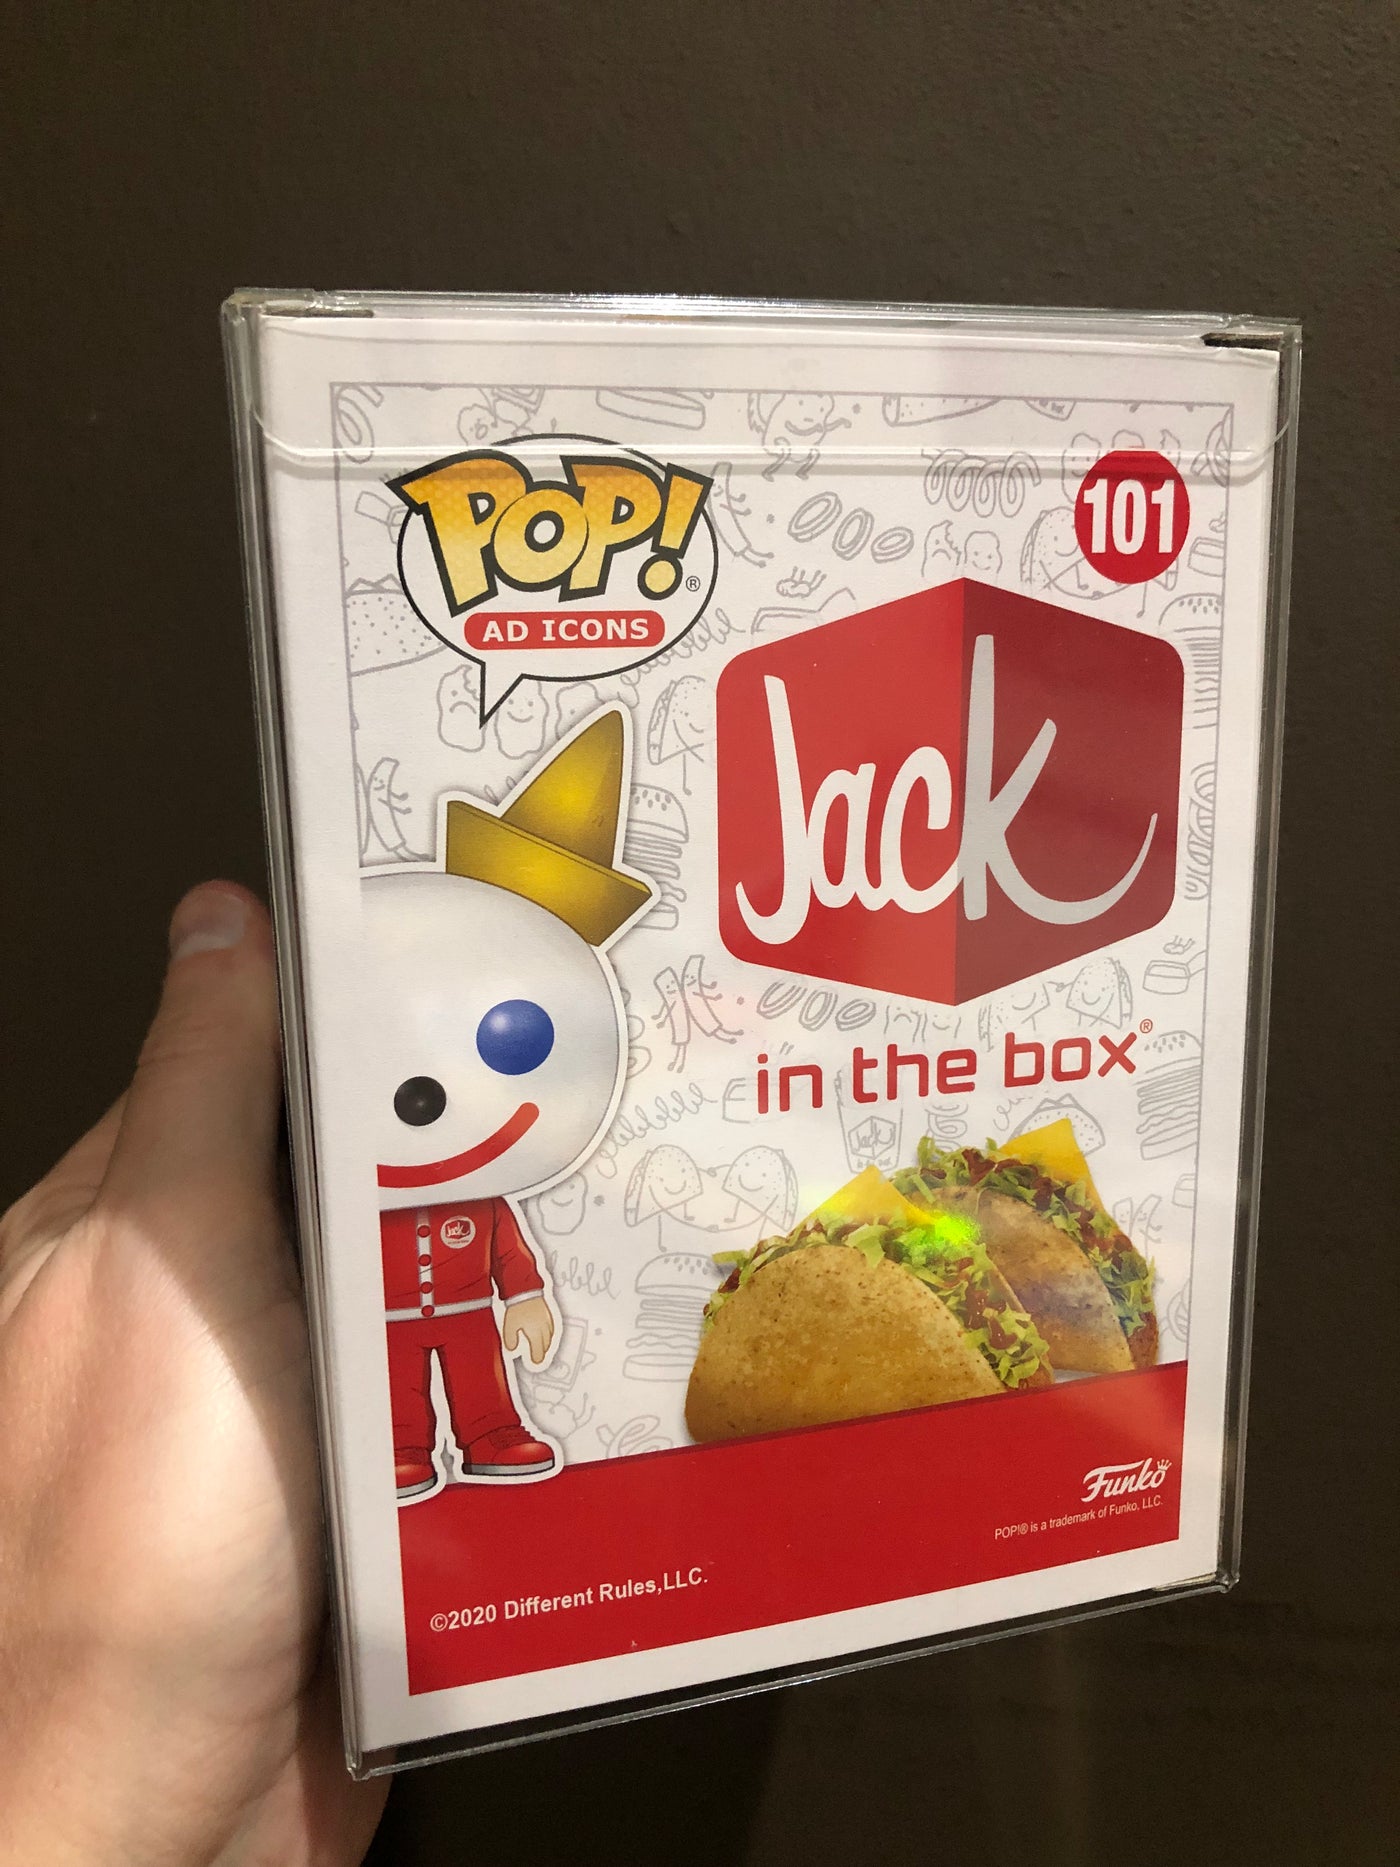 Jack in the Box in Tracksuit (Virtual Funkon) LE 2000